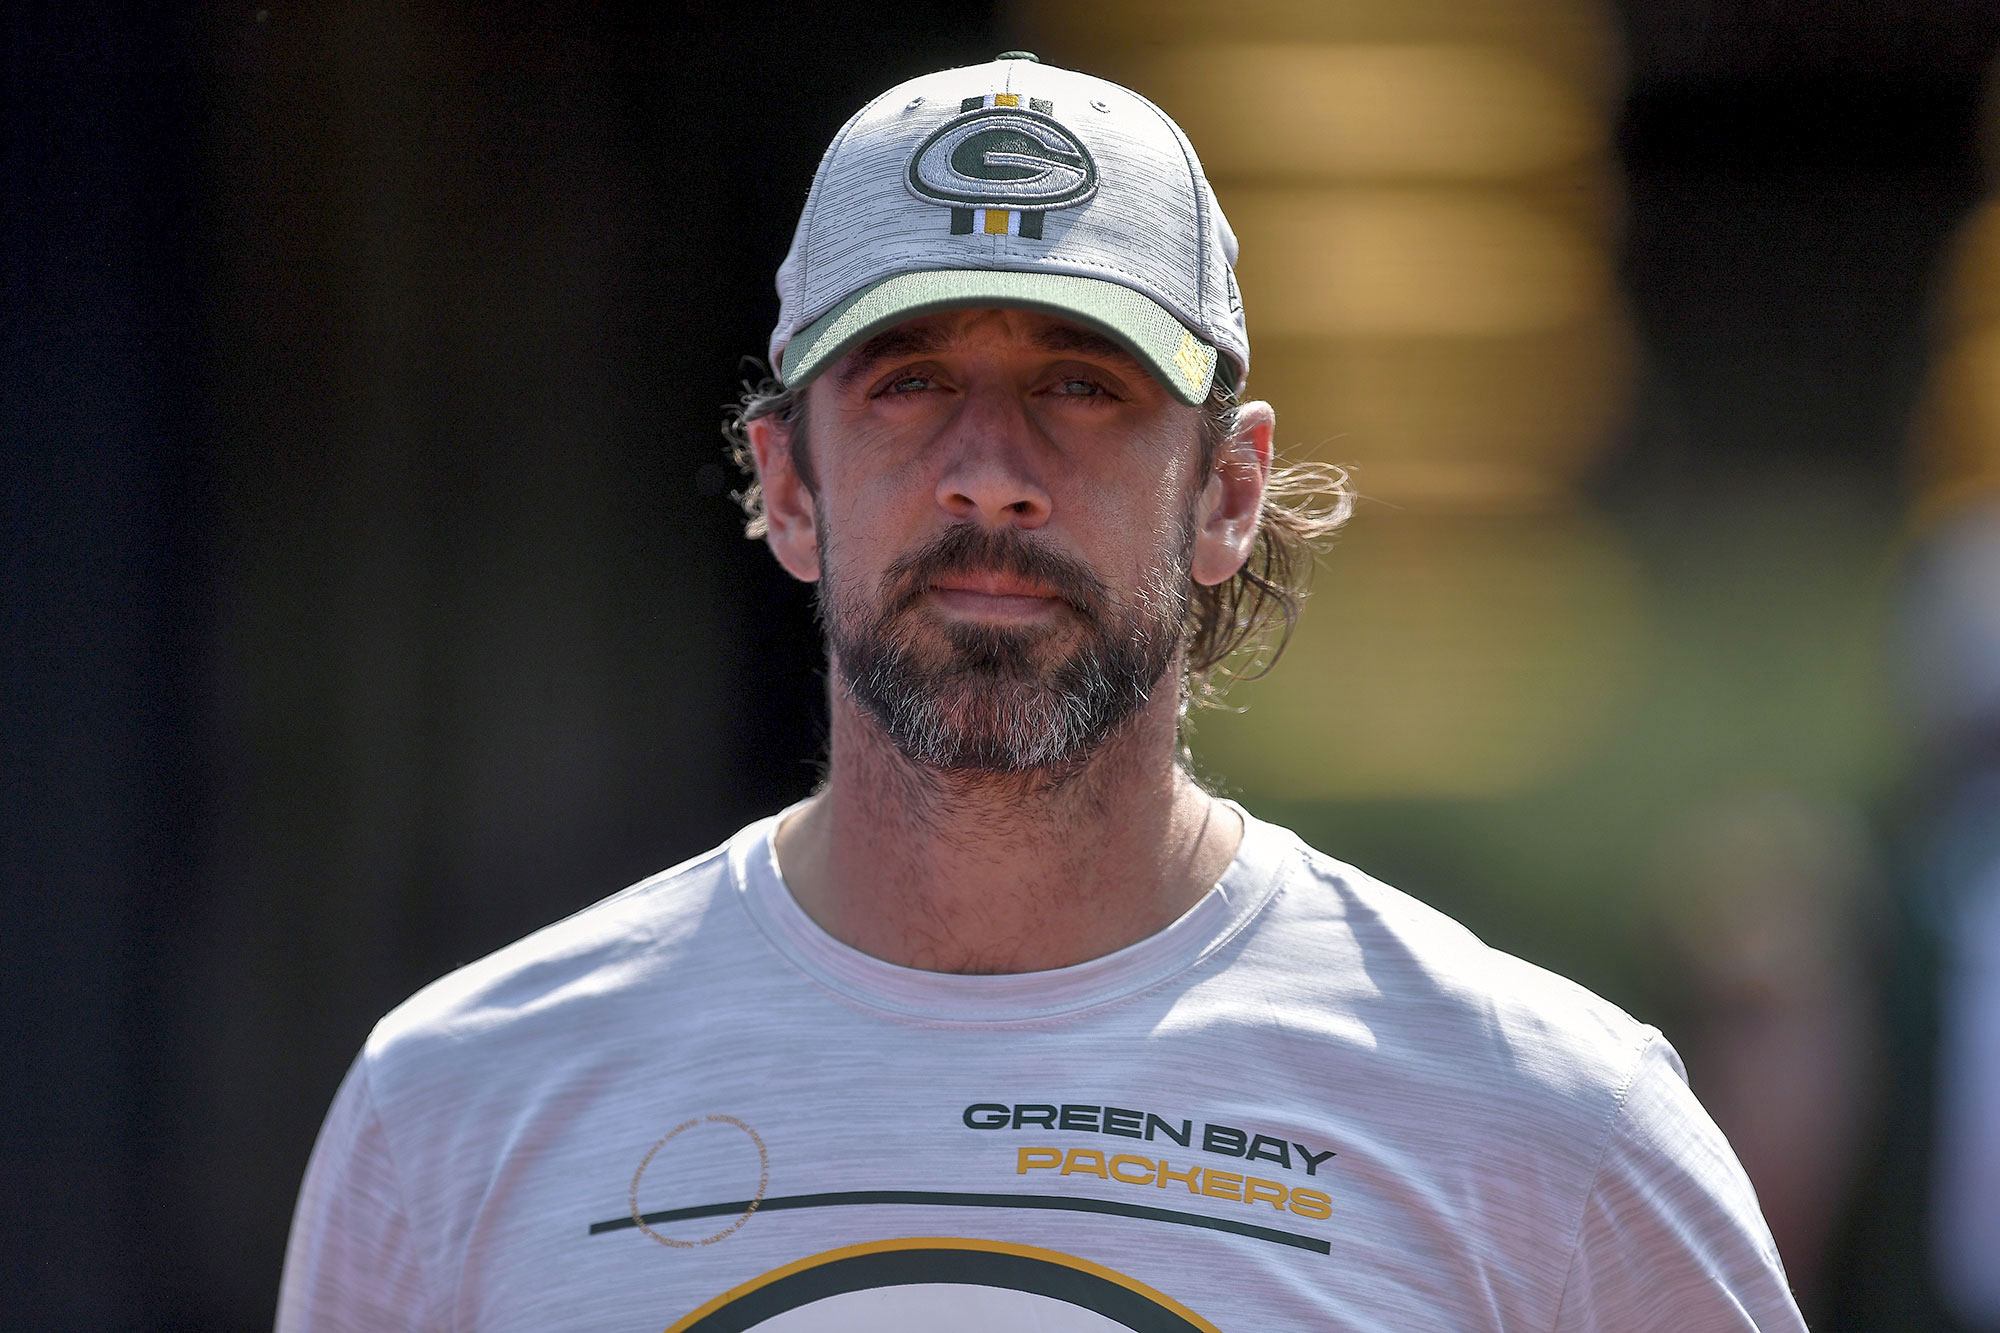 Aaron Rodgers Thought COVID-19 Vaccine Would Impact Fertility